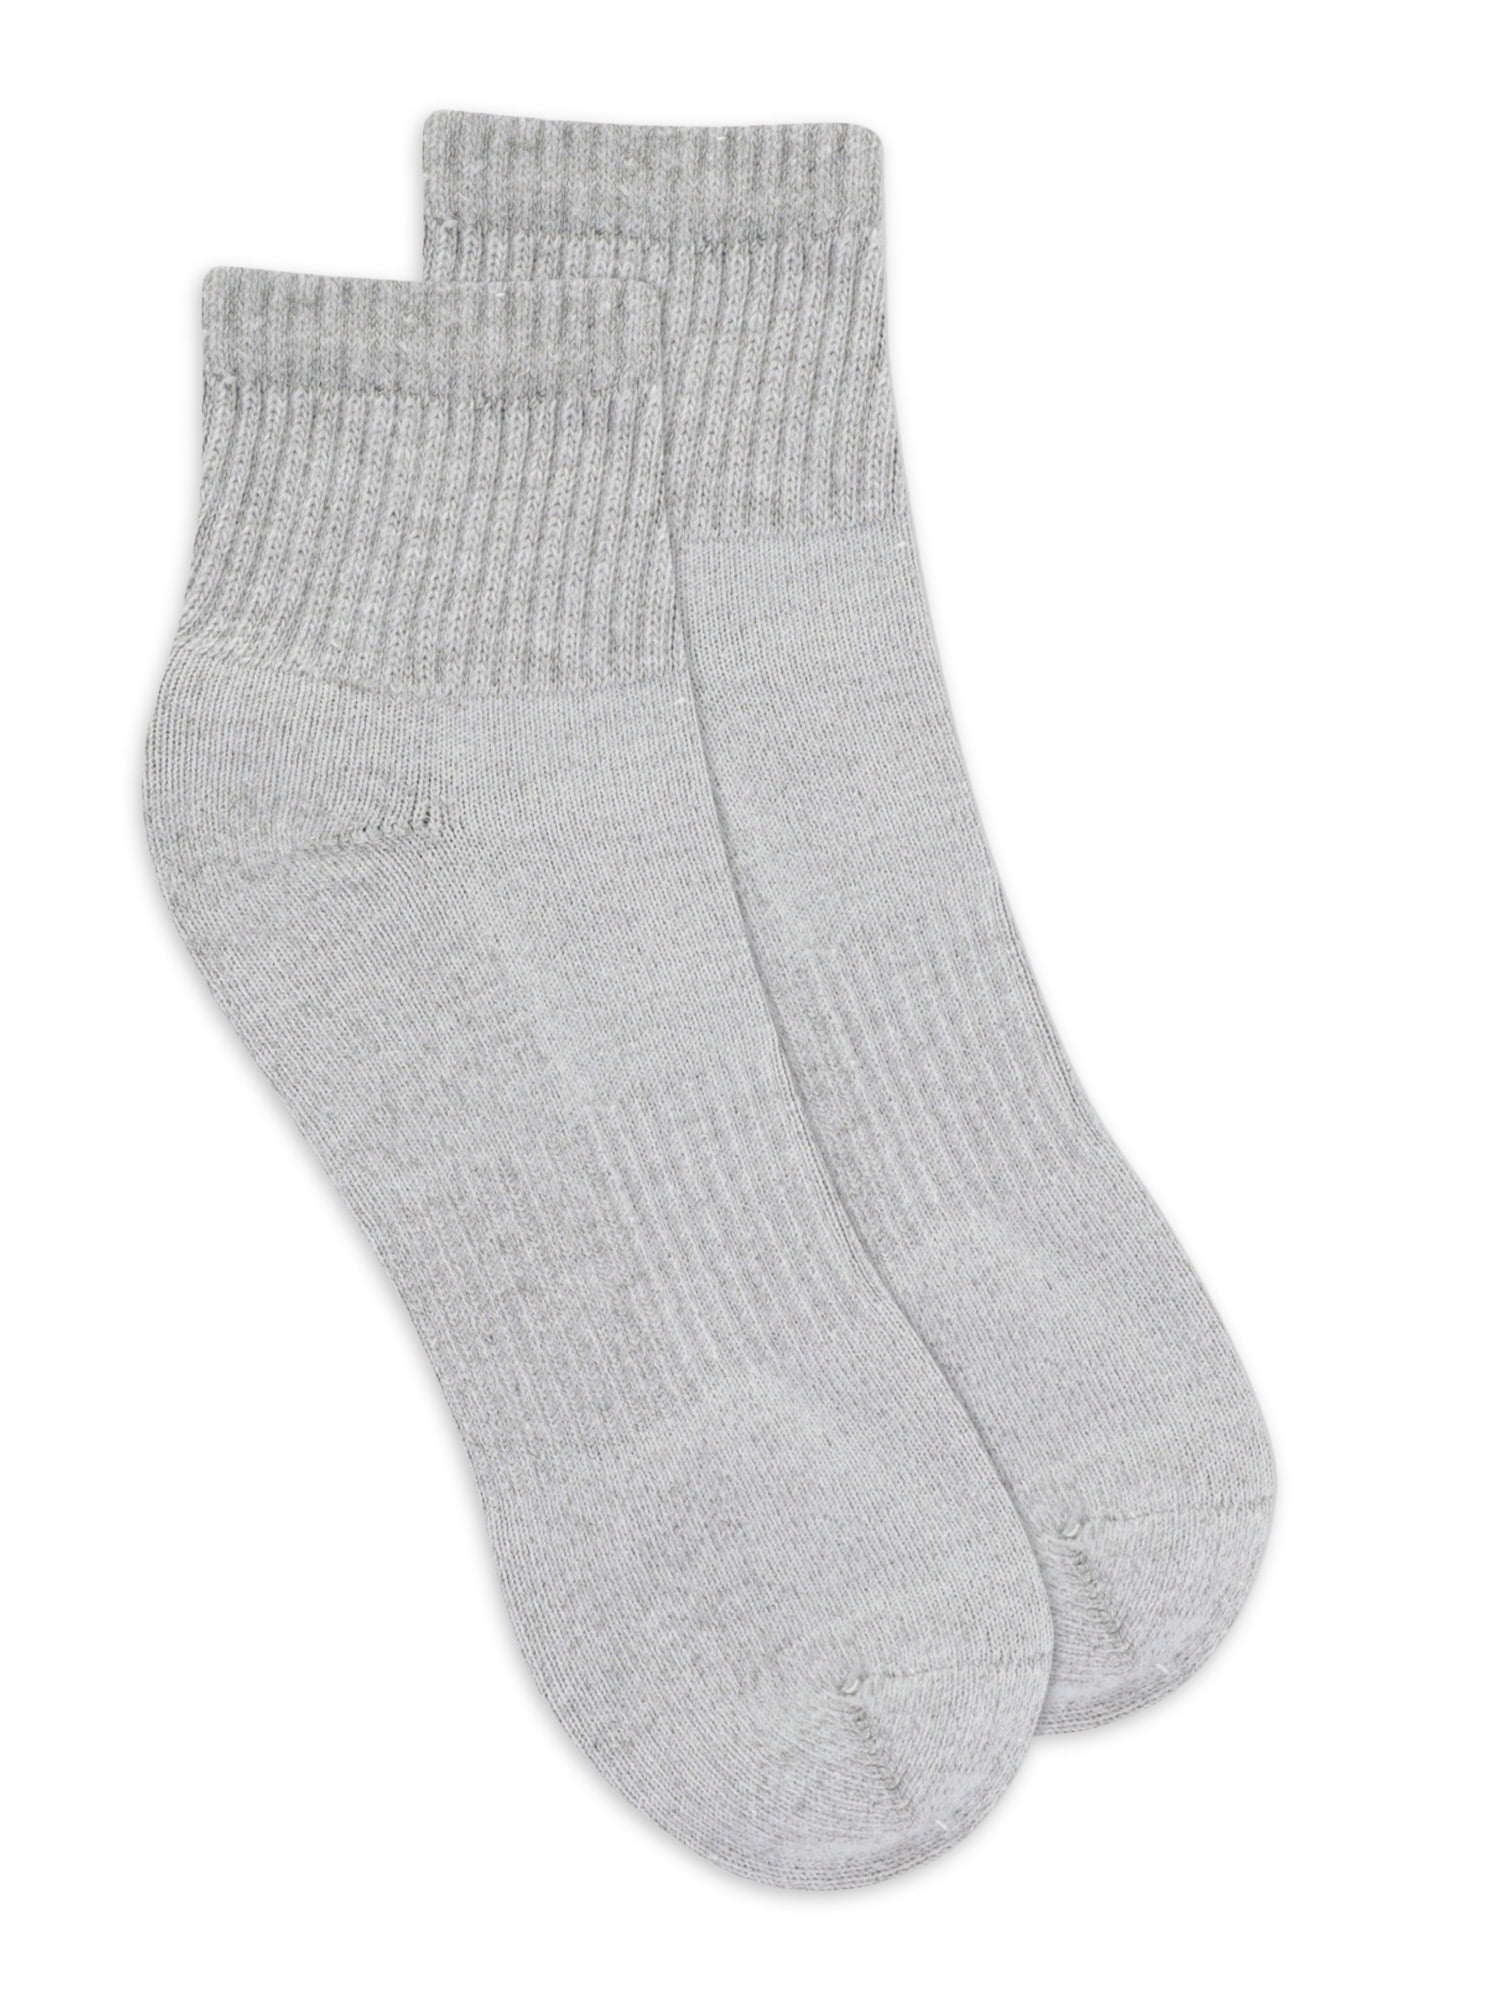 UPAREL Men Cotton Ankle NYX Socks - Pack of 3 (Multicolor)